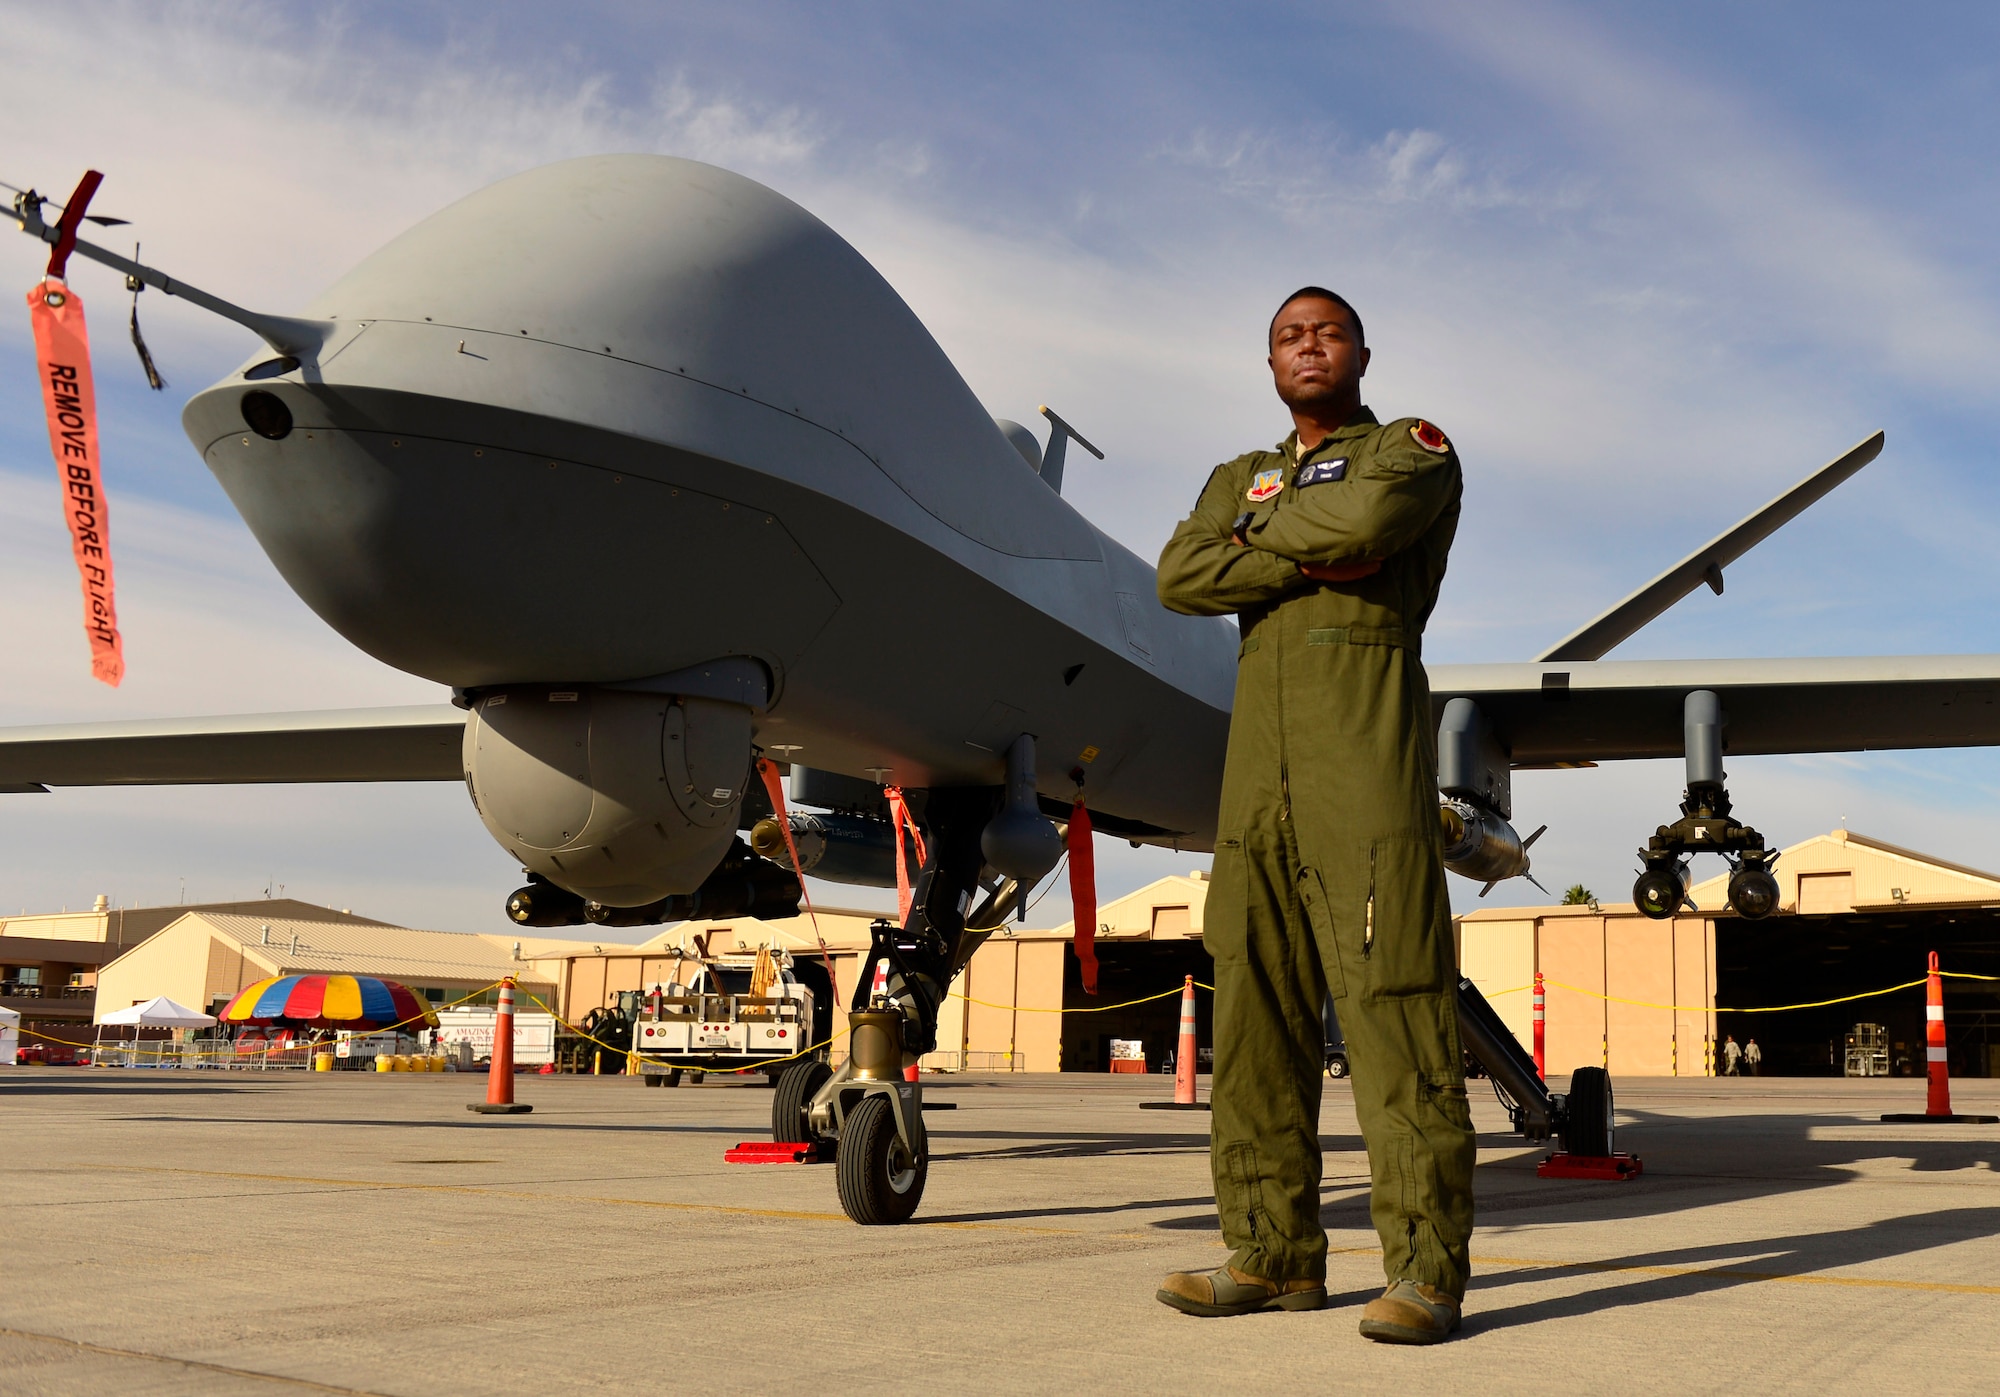 Staff Sgt. Kenneth, 432nd Wing MQ-9 sensor operator, stands in front of an MQ-9 Reaper during Aviation Nation Nov. 11, 2016, at Nellis Air Force Base, Nevada. Kenneth, along with many other maintenance, intelligence and aircrew members of Creech Air Force Base, Nevada, briefed spectators about the capabilities and basic functions of the MQ-9 Reaper and MQ-1 Predator. (U.S. Air Force photo by Senior Airman Christian Clausen/Released)